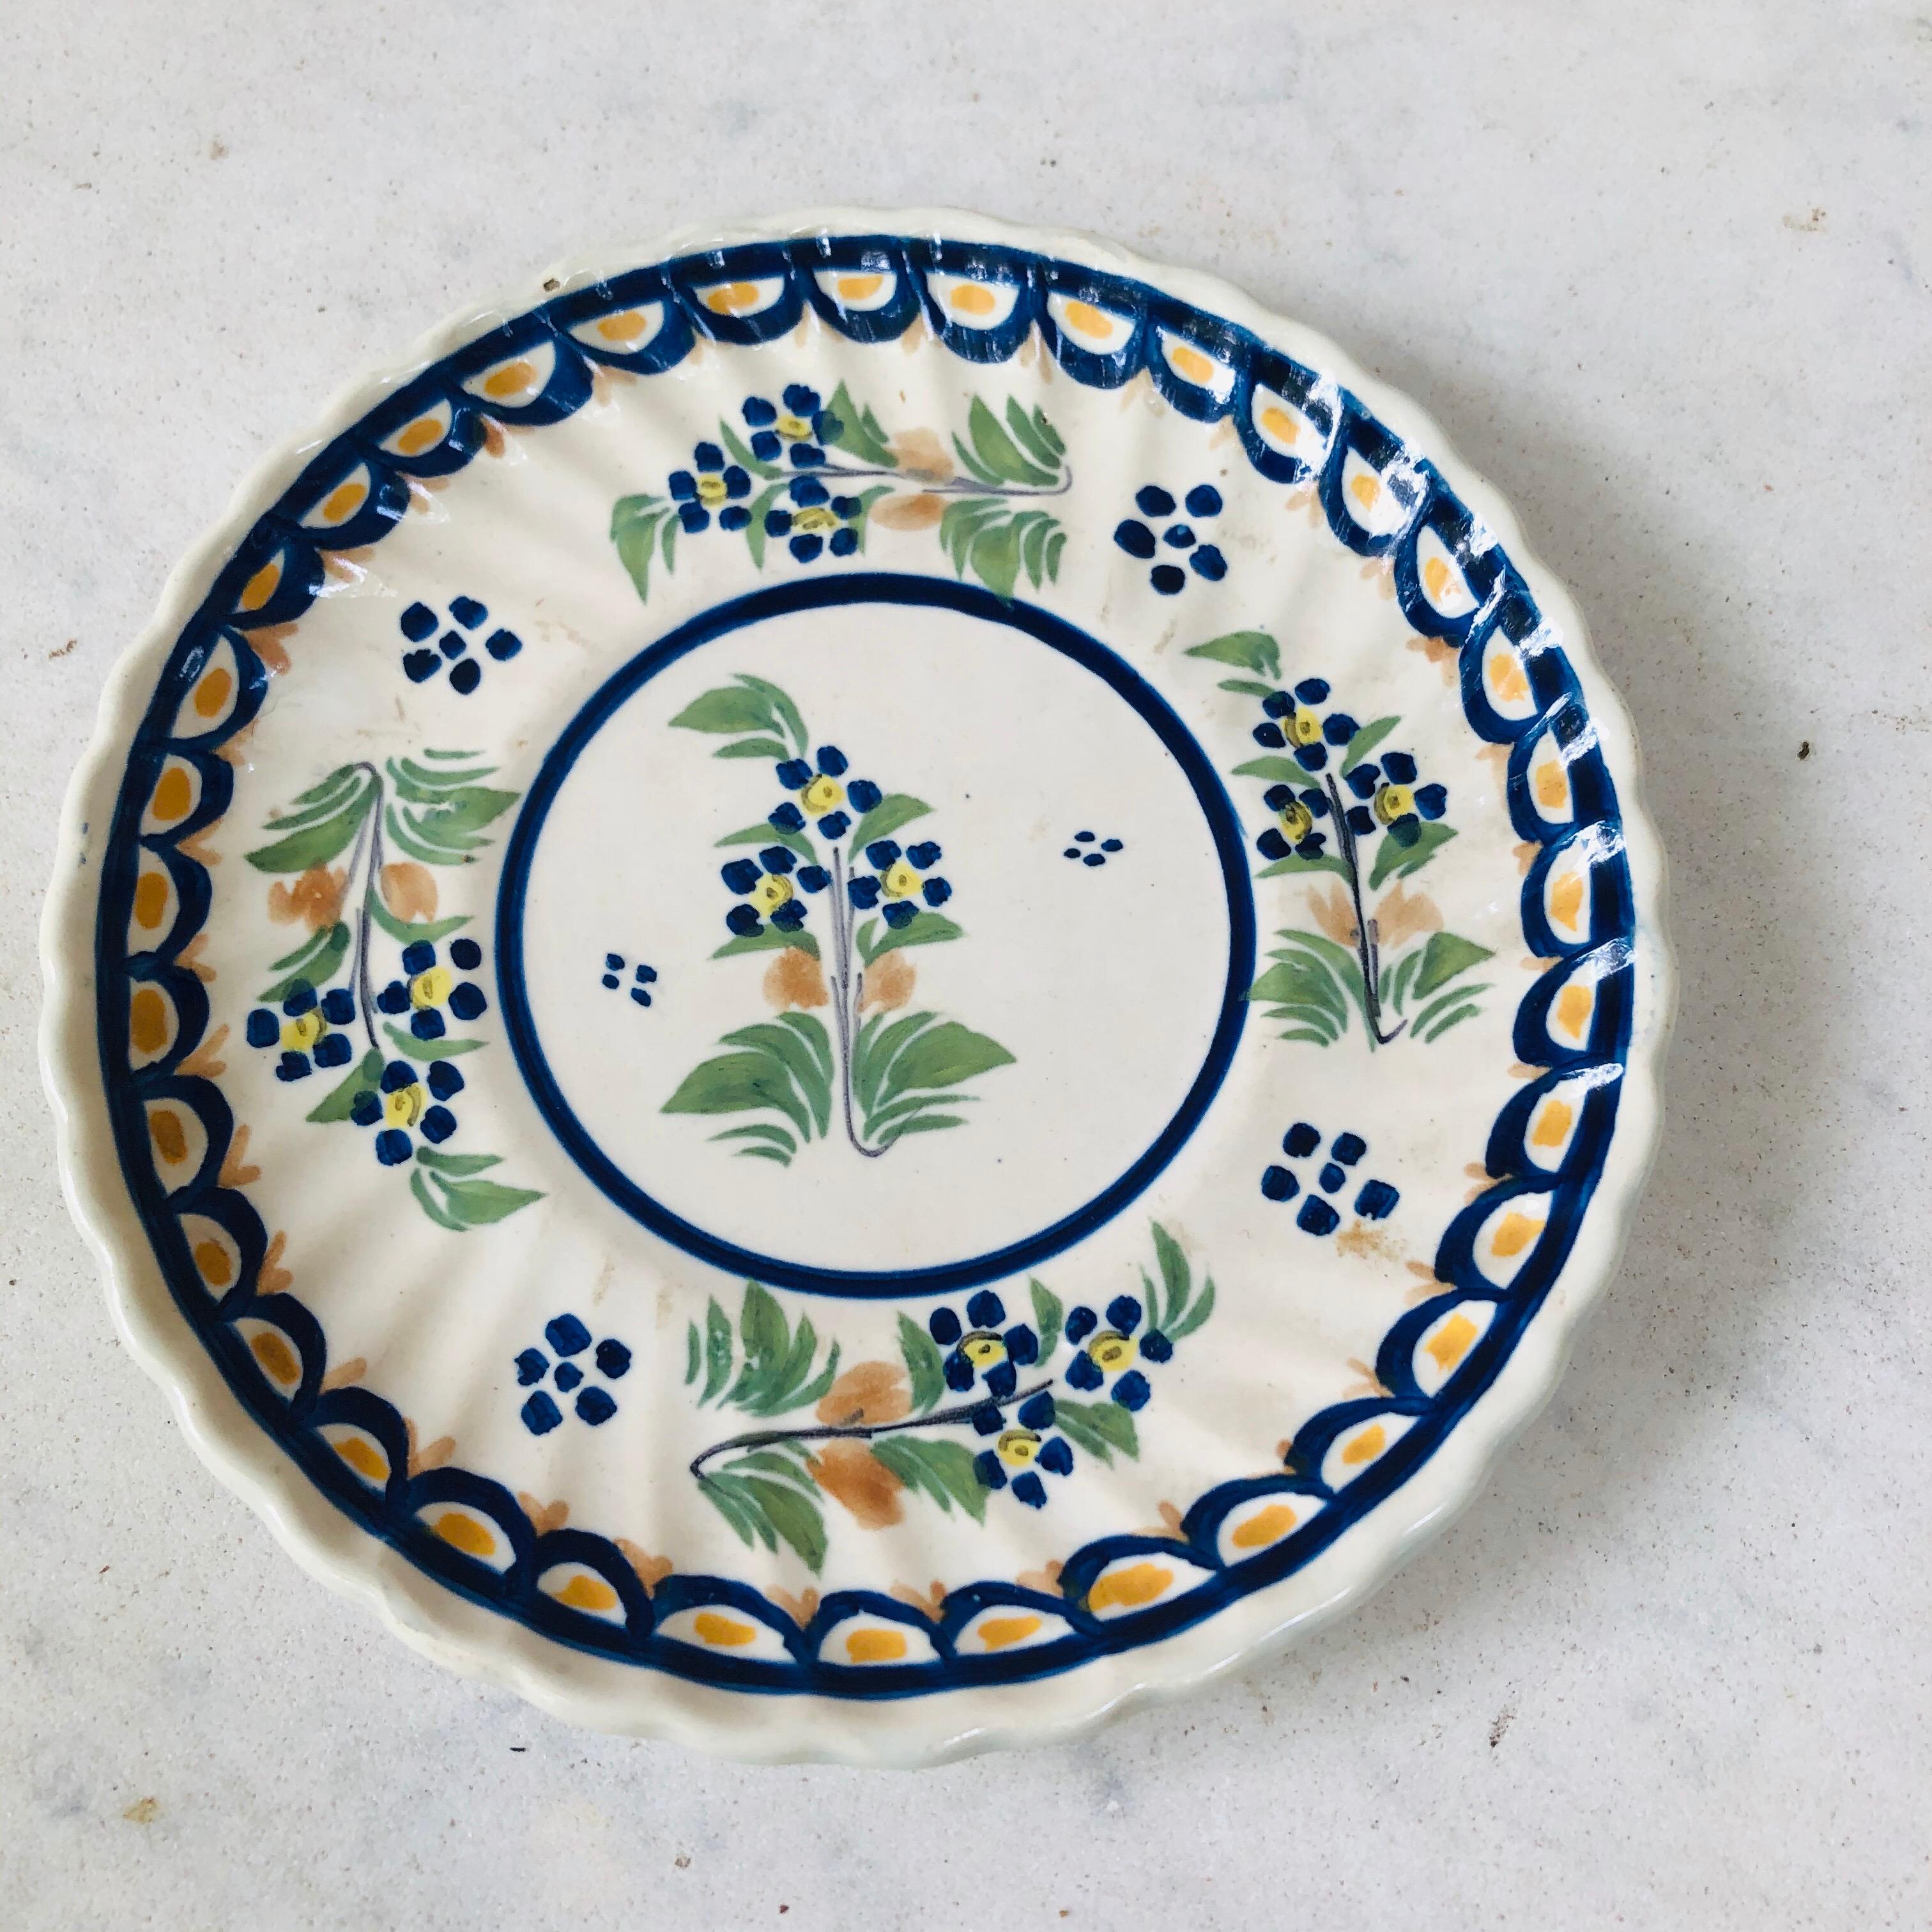 French Provincial Small French Faience Plate Henriot Quimper, circa 1930